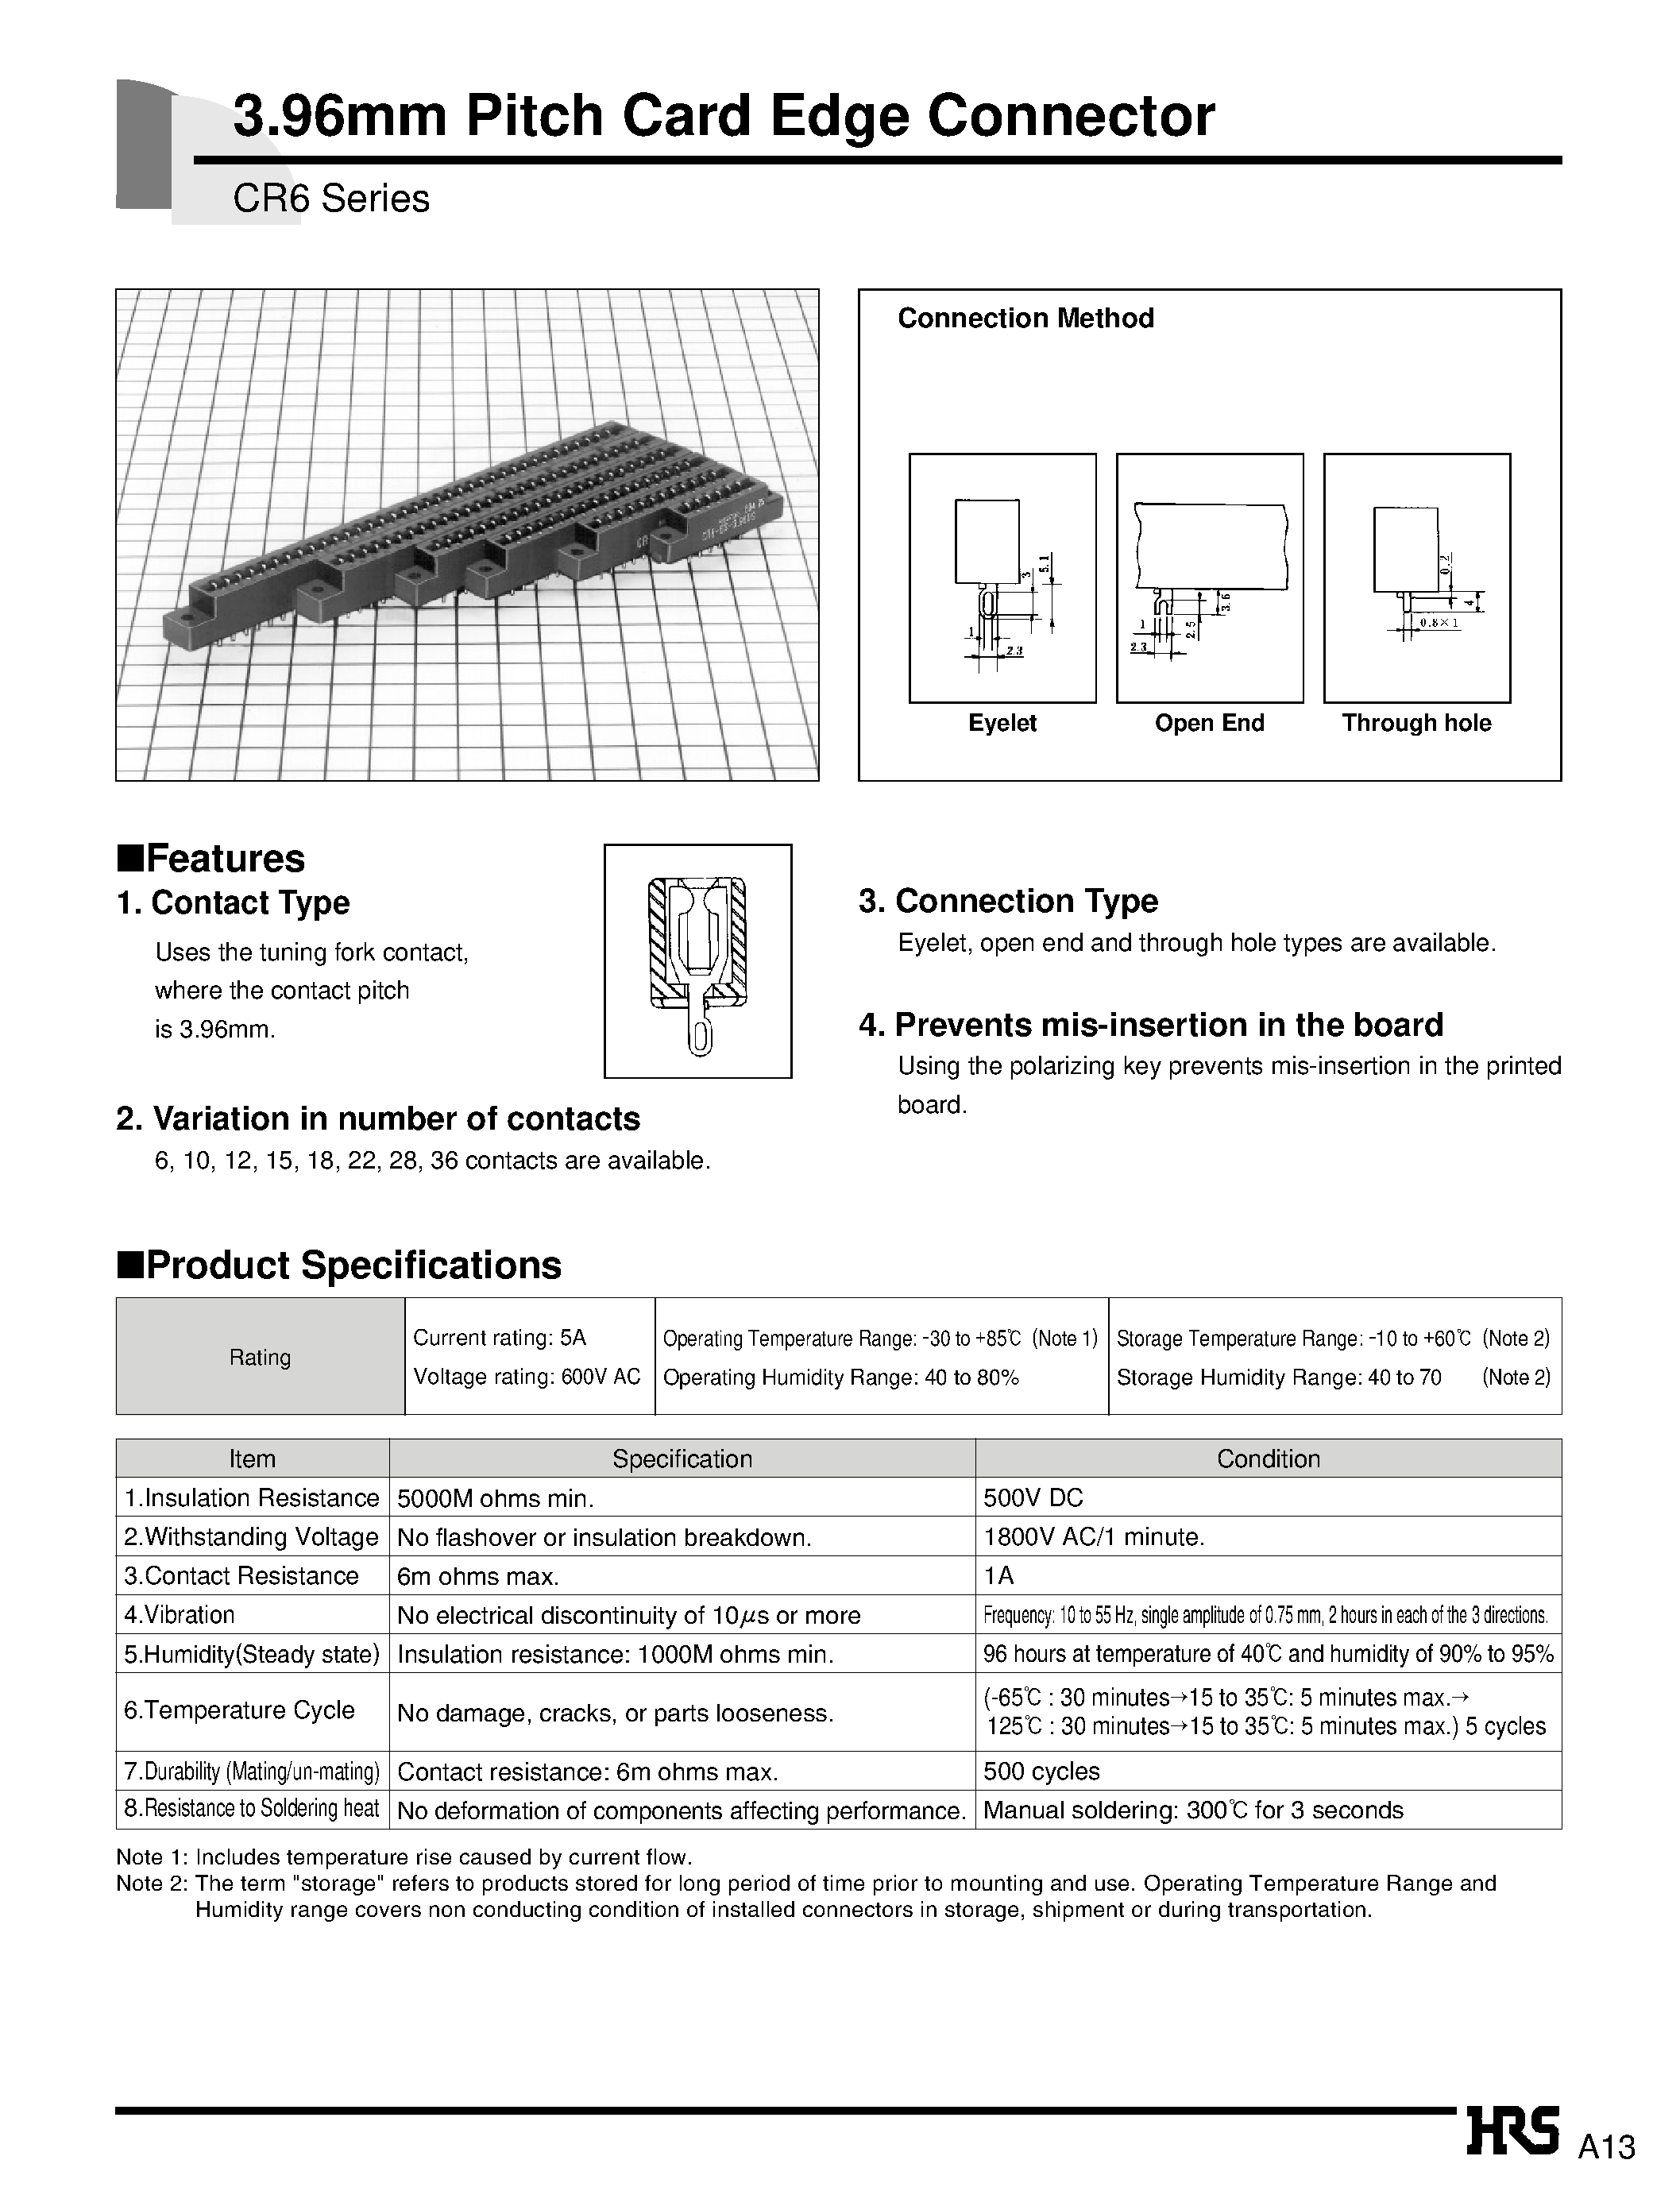 Datasheet CR6-22S-3.96DS - 3.96mm Pitch Card Edge Connector page 1